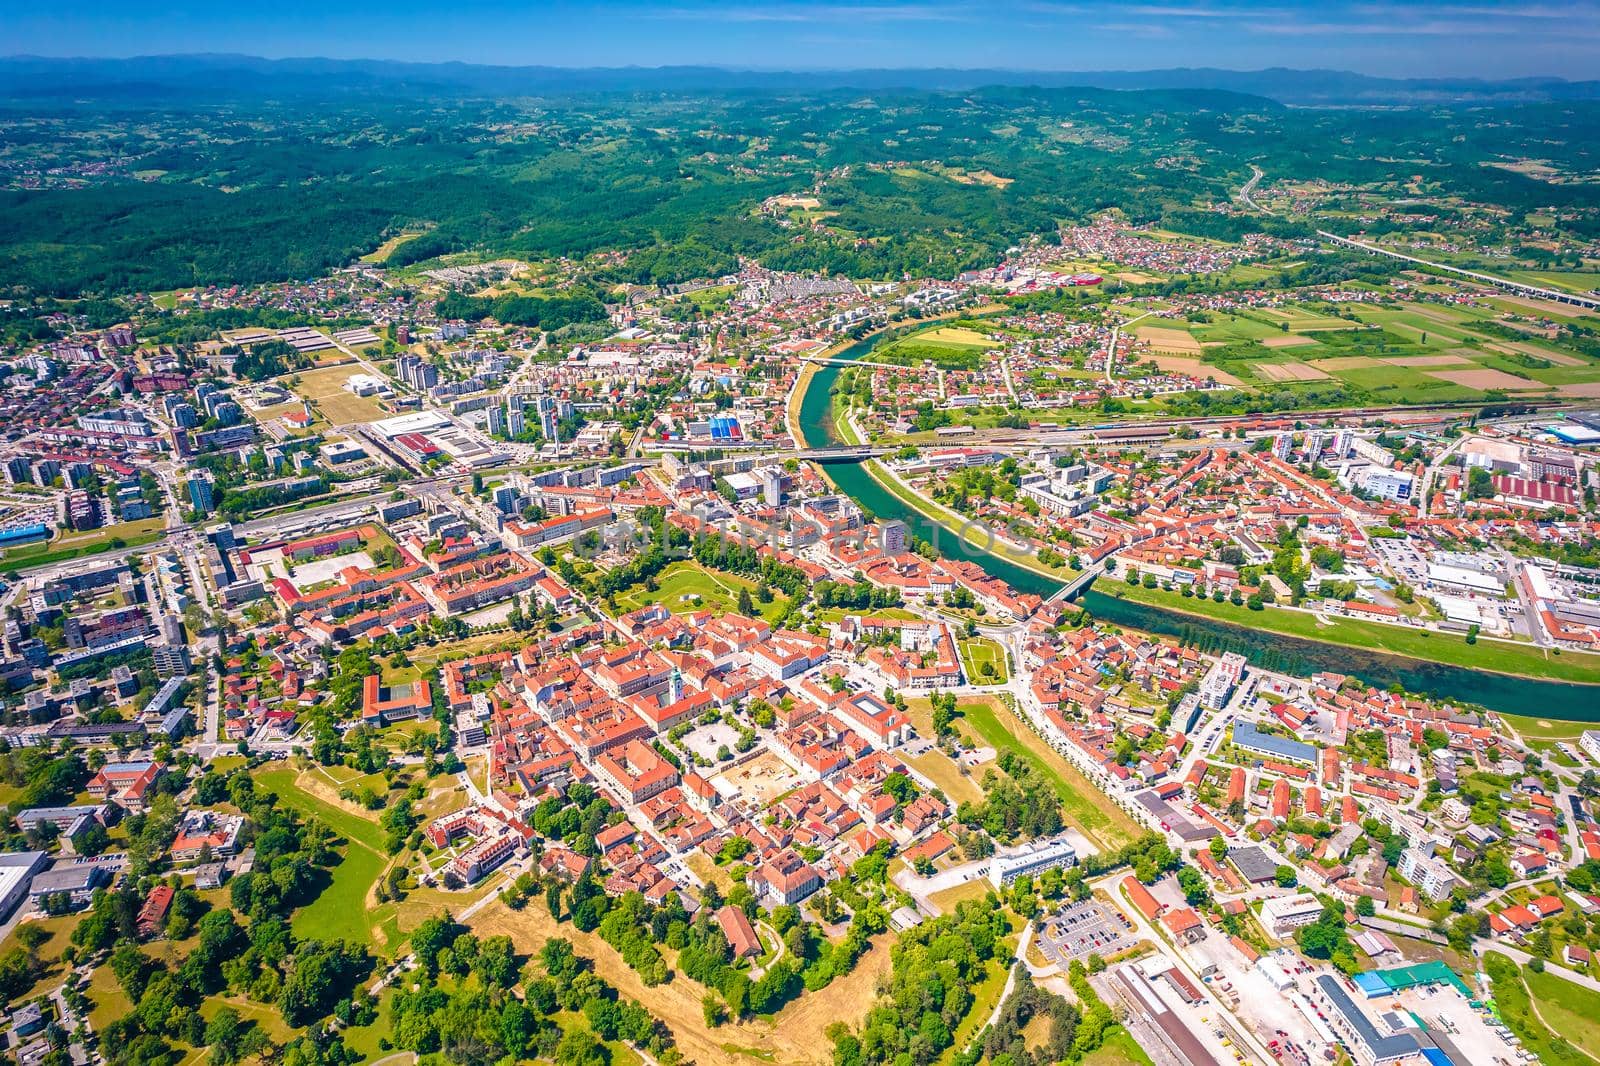 Town of Karlovac on four rivers aerial panoramic view, central Croatia